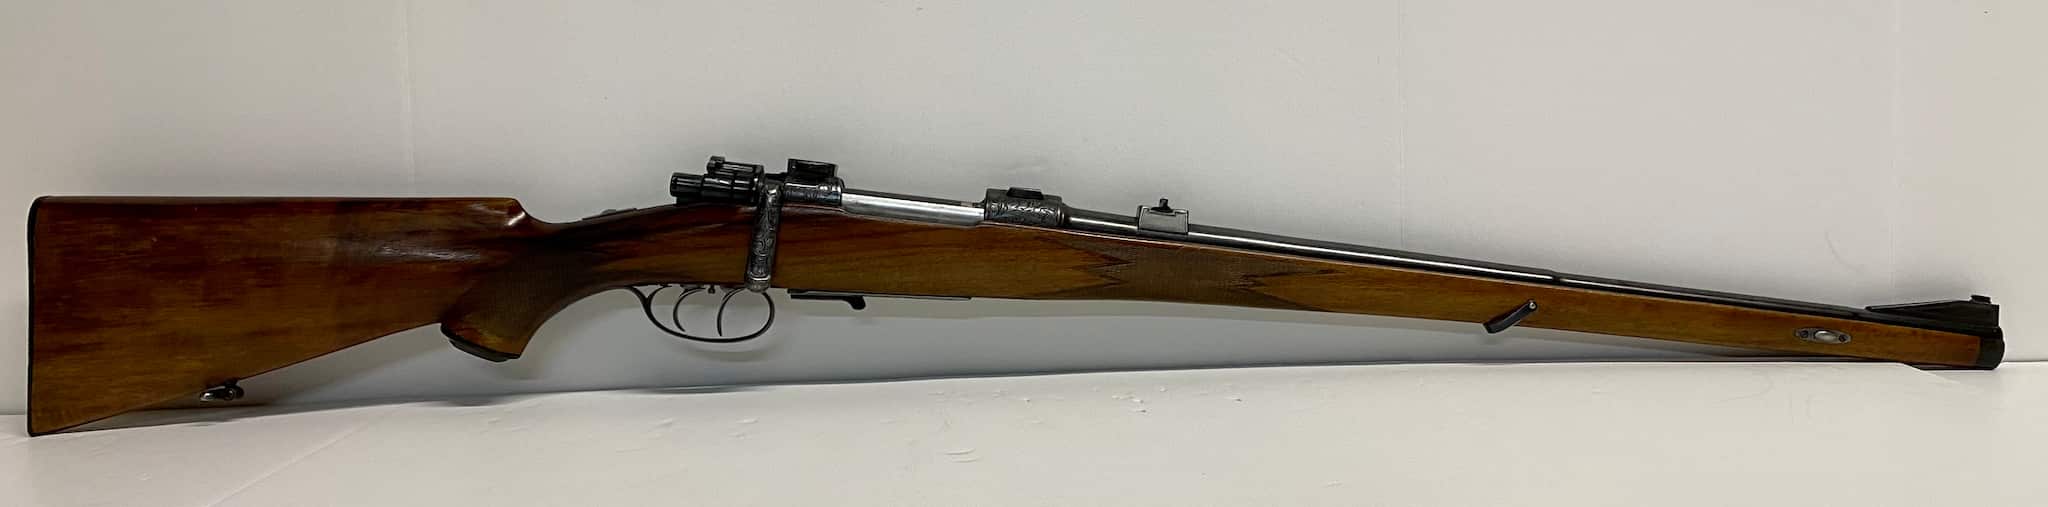 Image of MAUSER 98